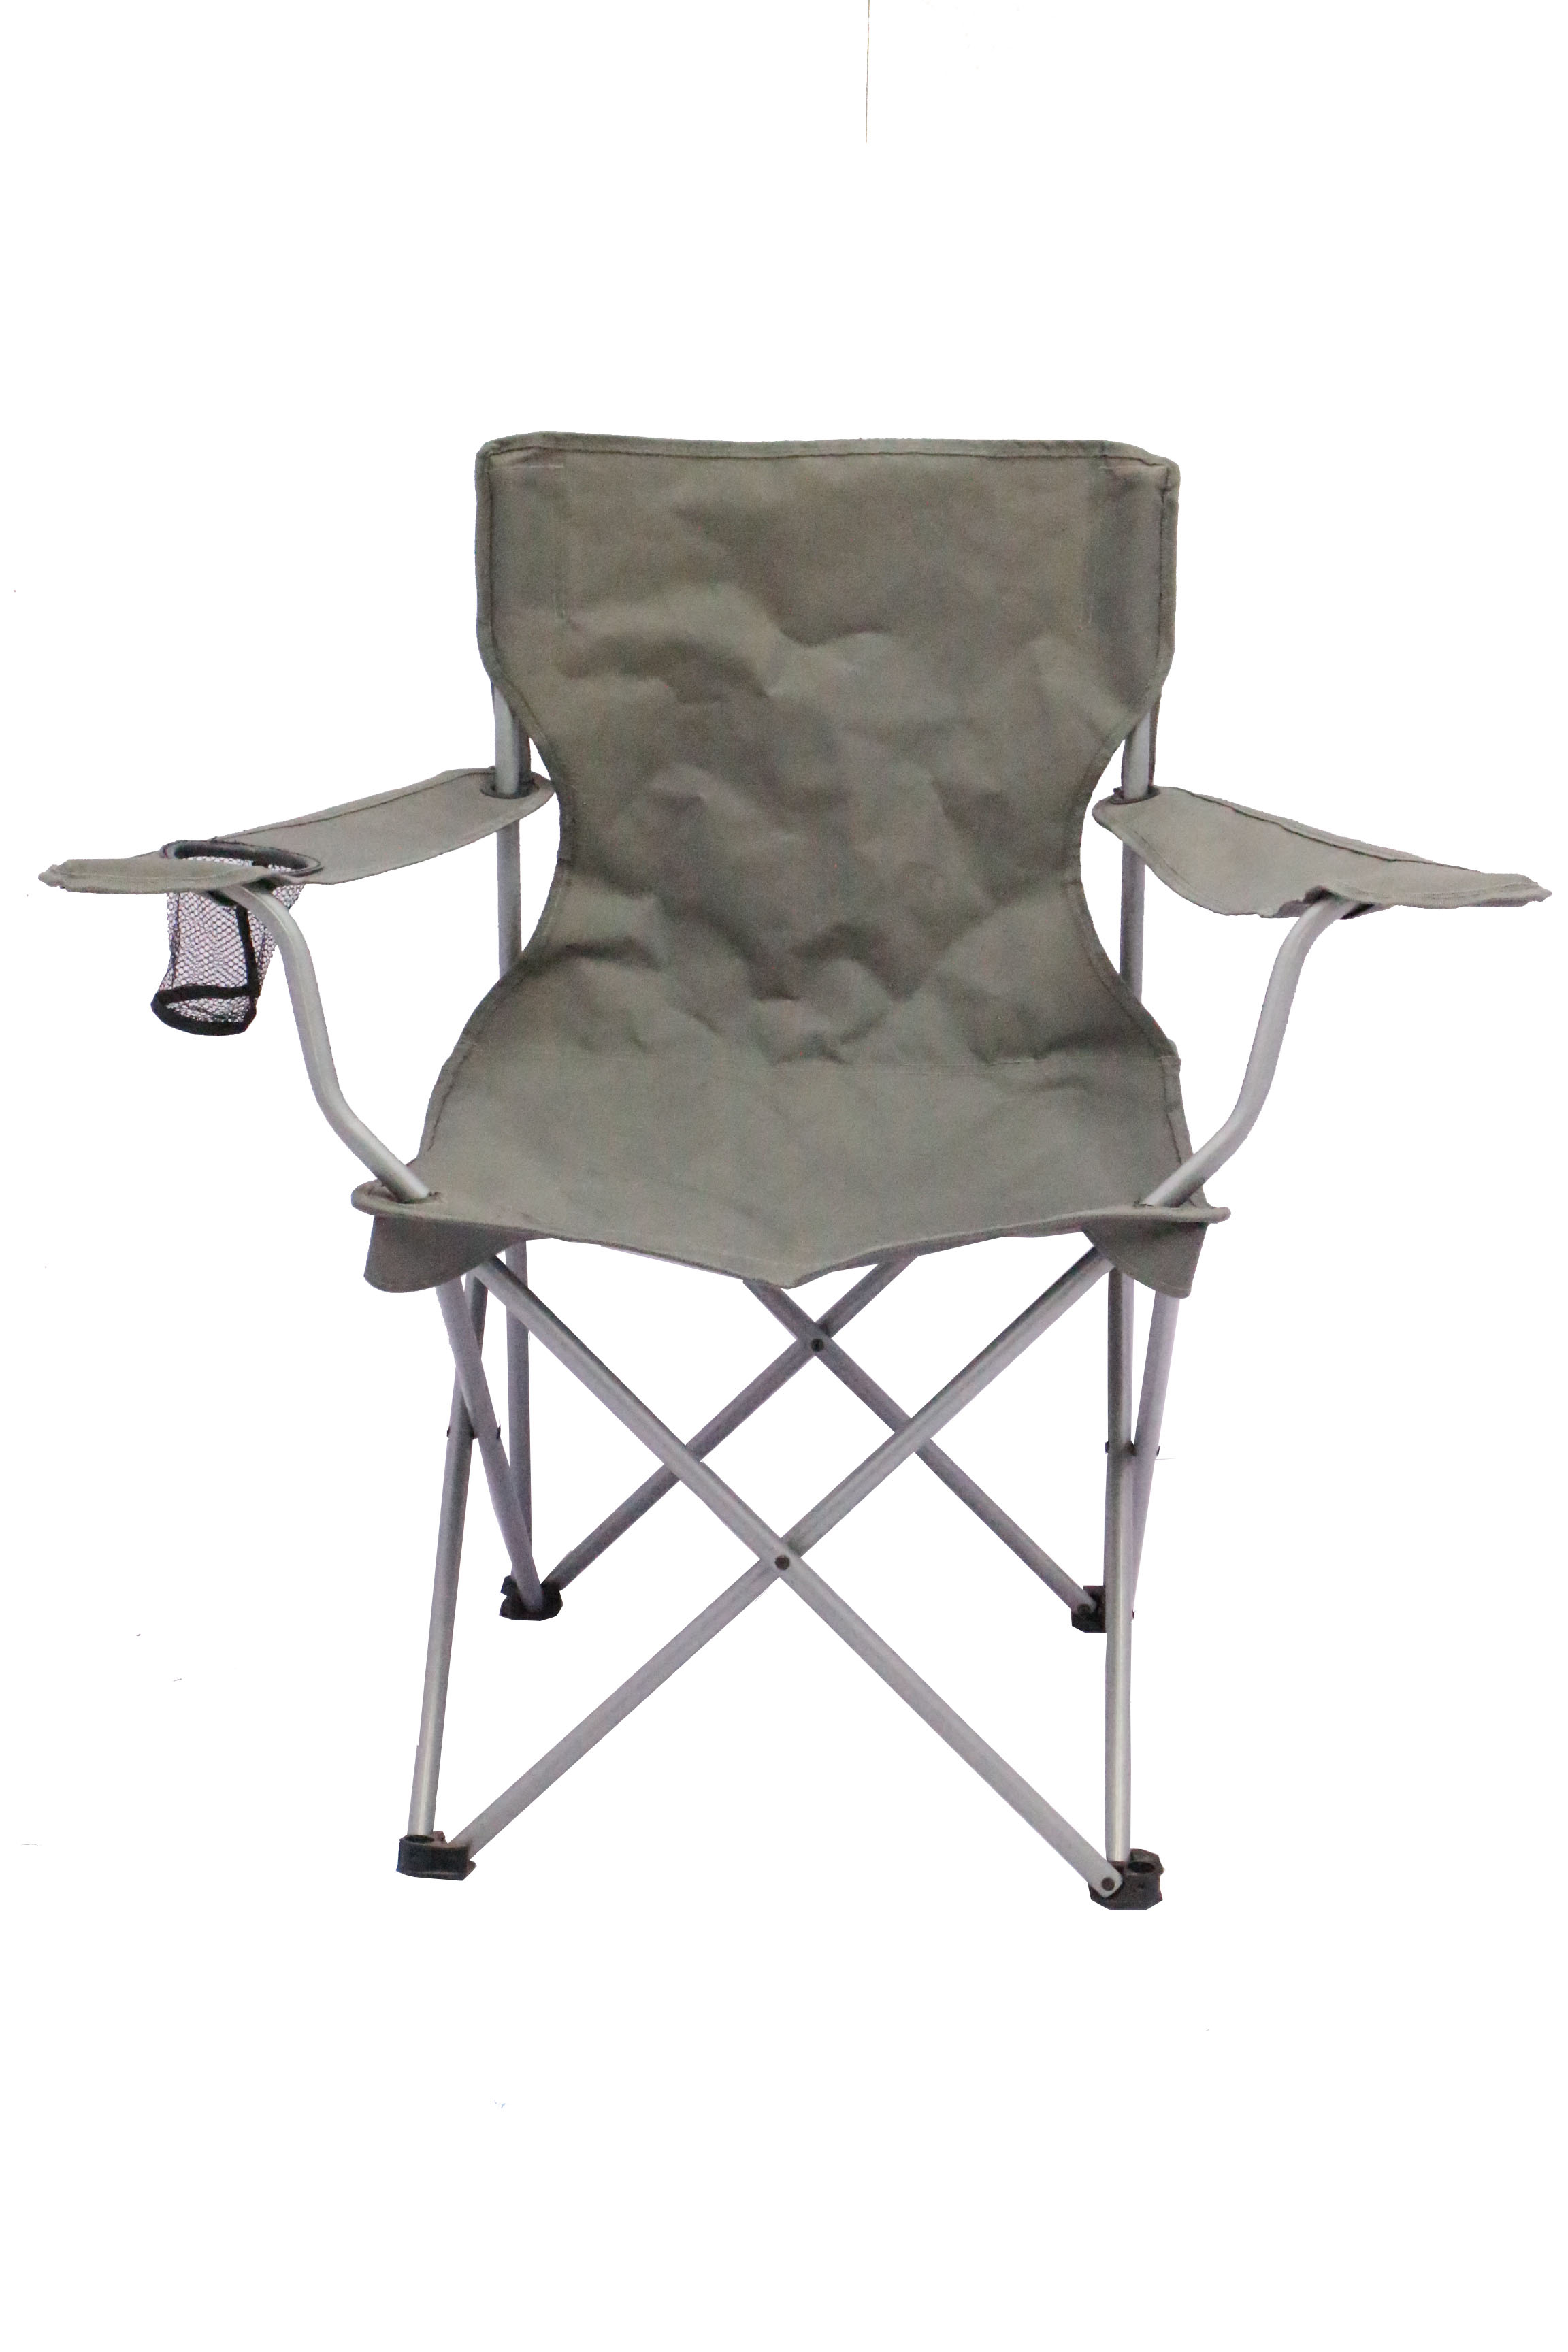 Ozark Trail Classic Folding Camp Chairs, with Mesh Cup Holder,Set of 4, 32.10 x 19.10 x 32.10 Inches - image 4 of 10